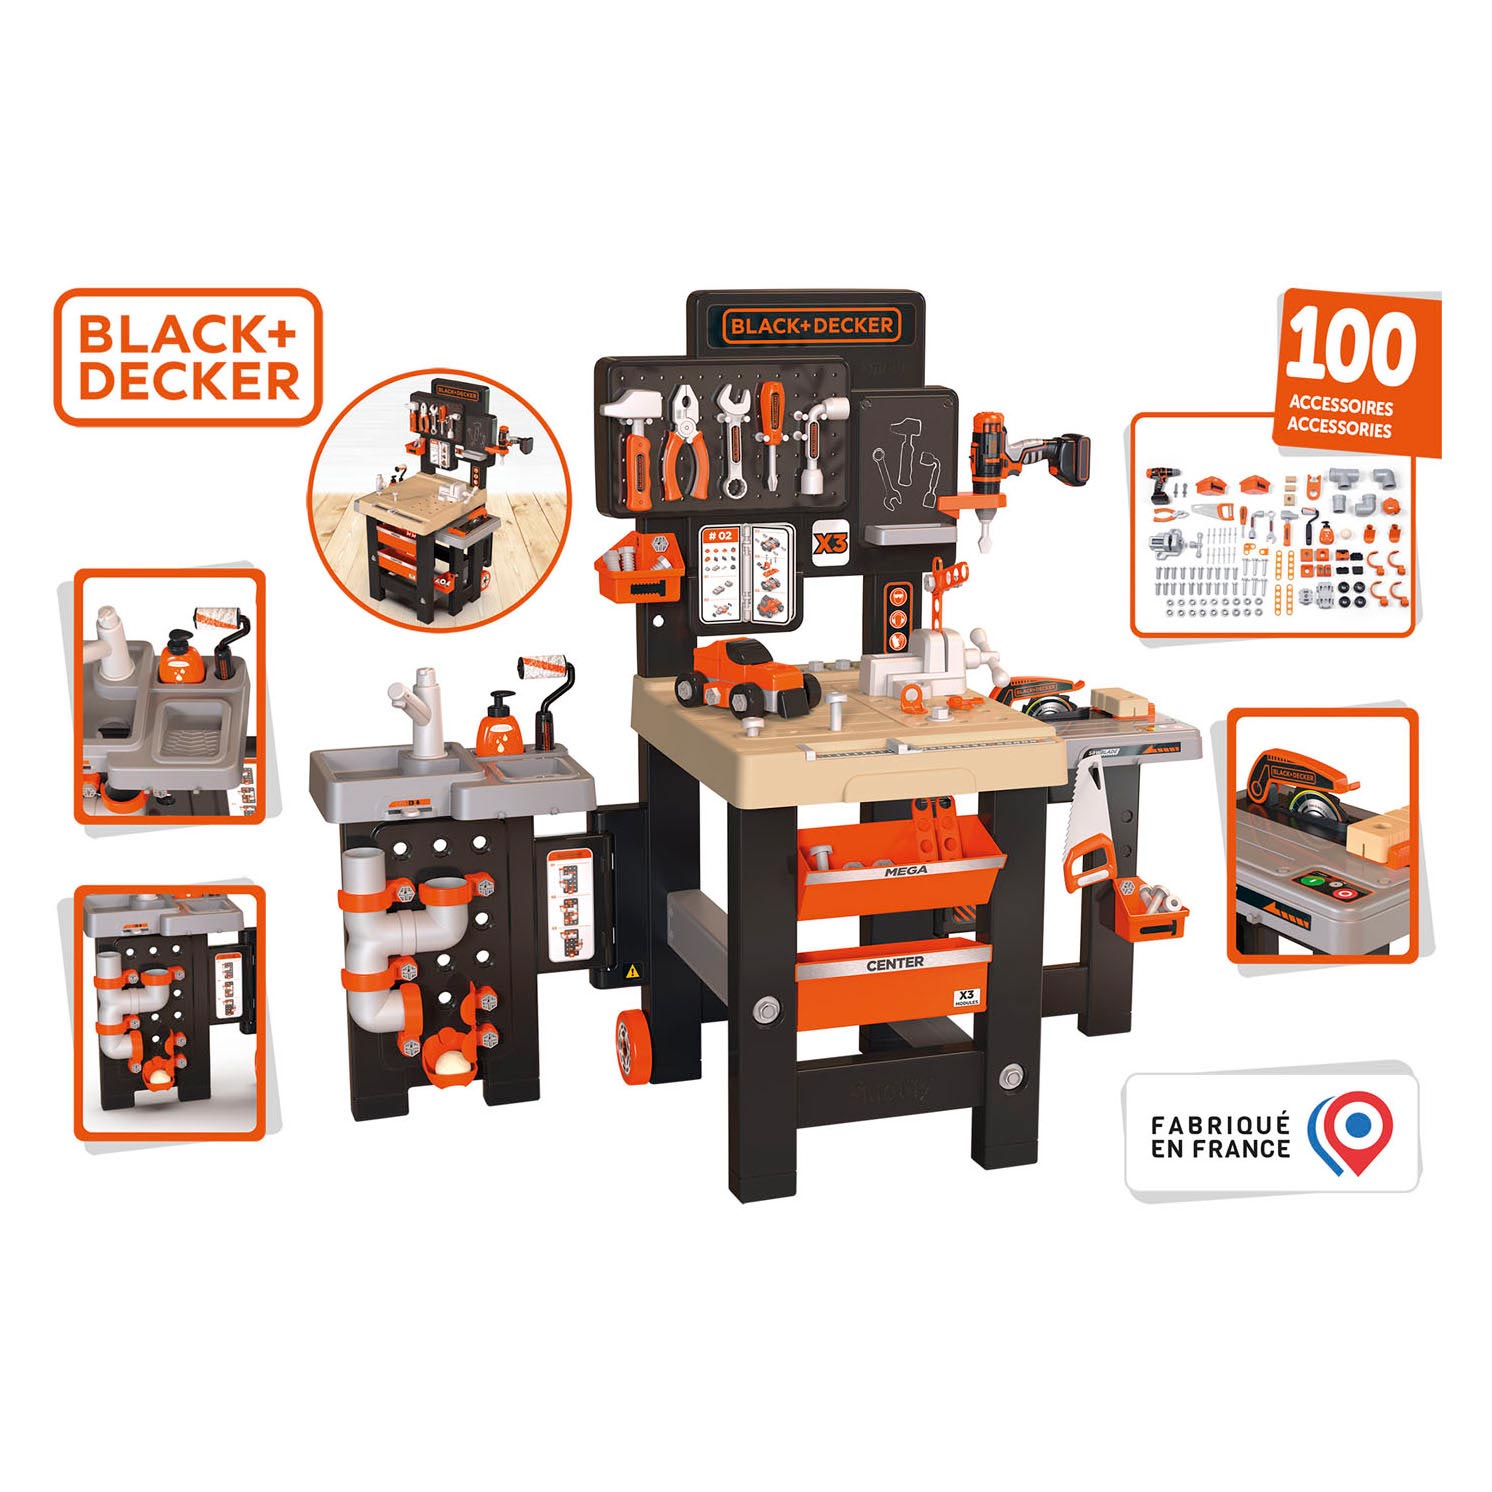 Smoby Black & Decker Workbench and Tool Centre